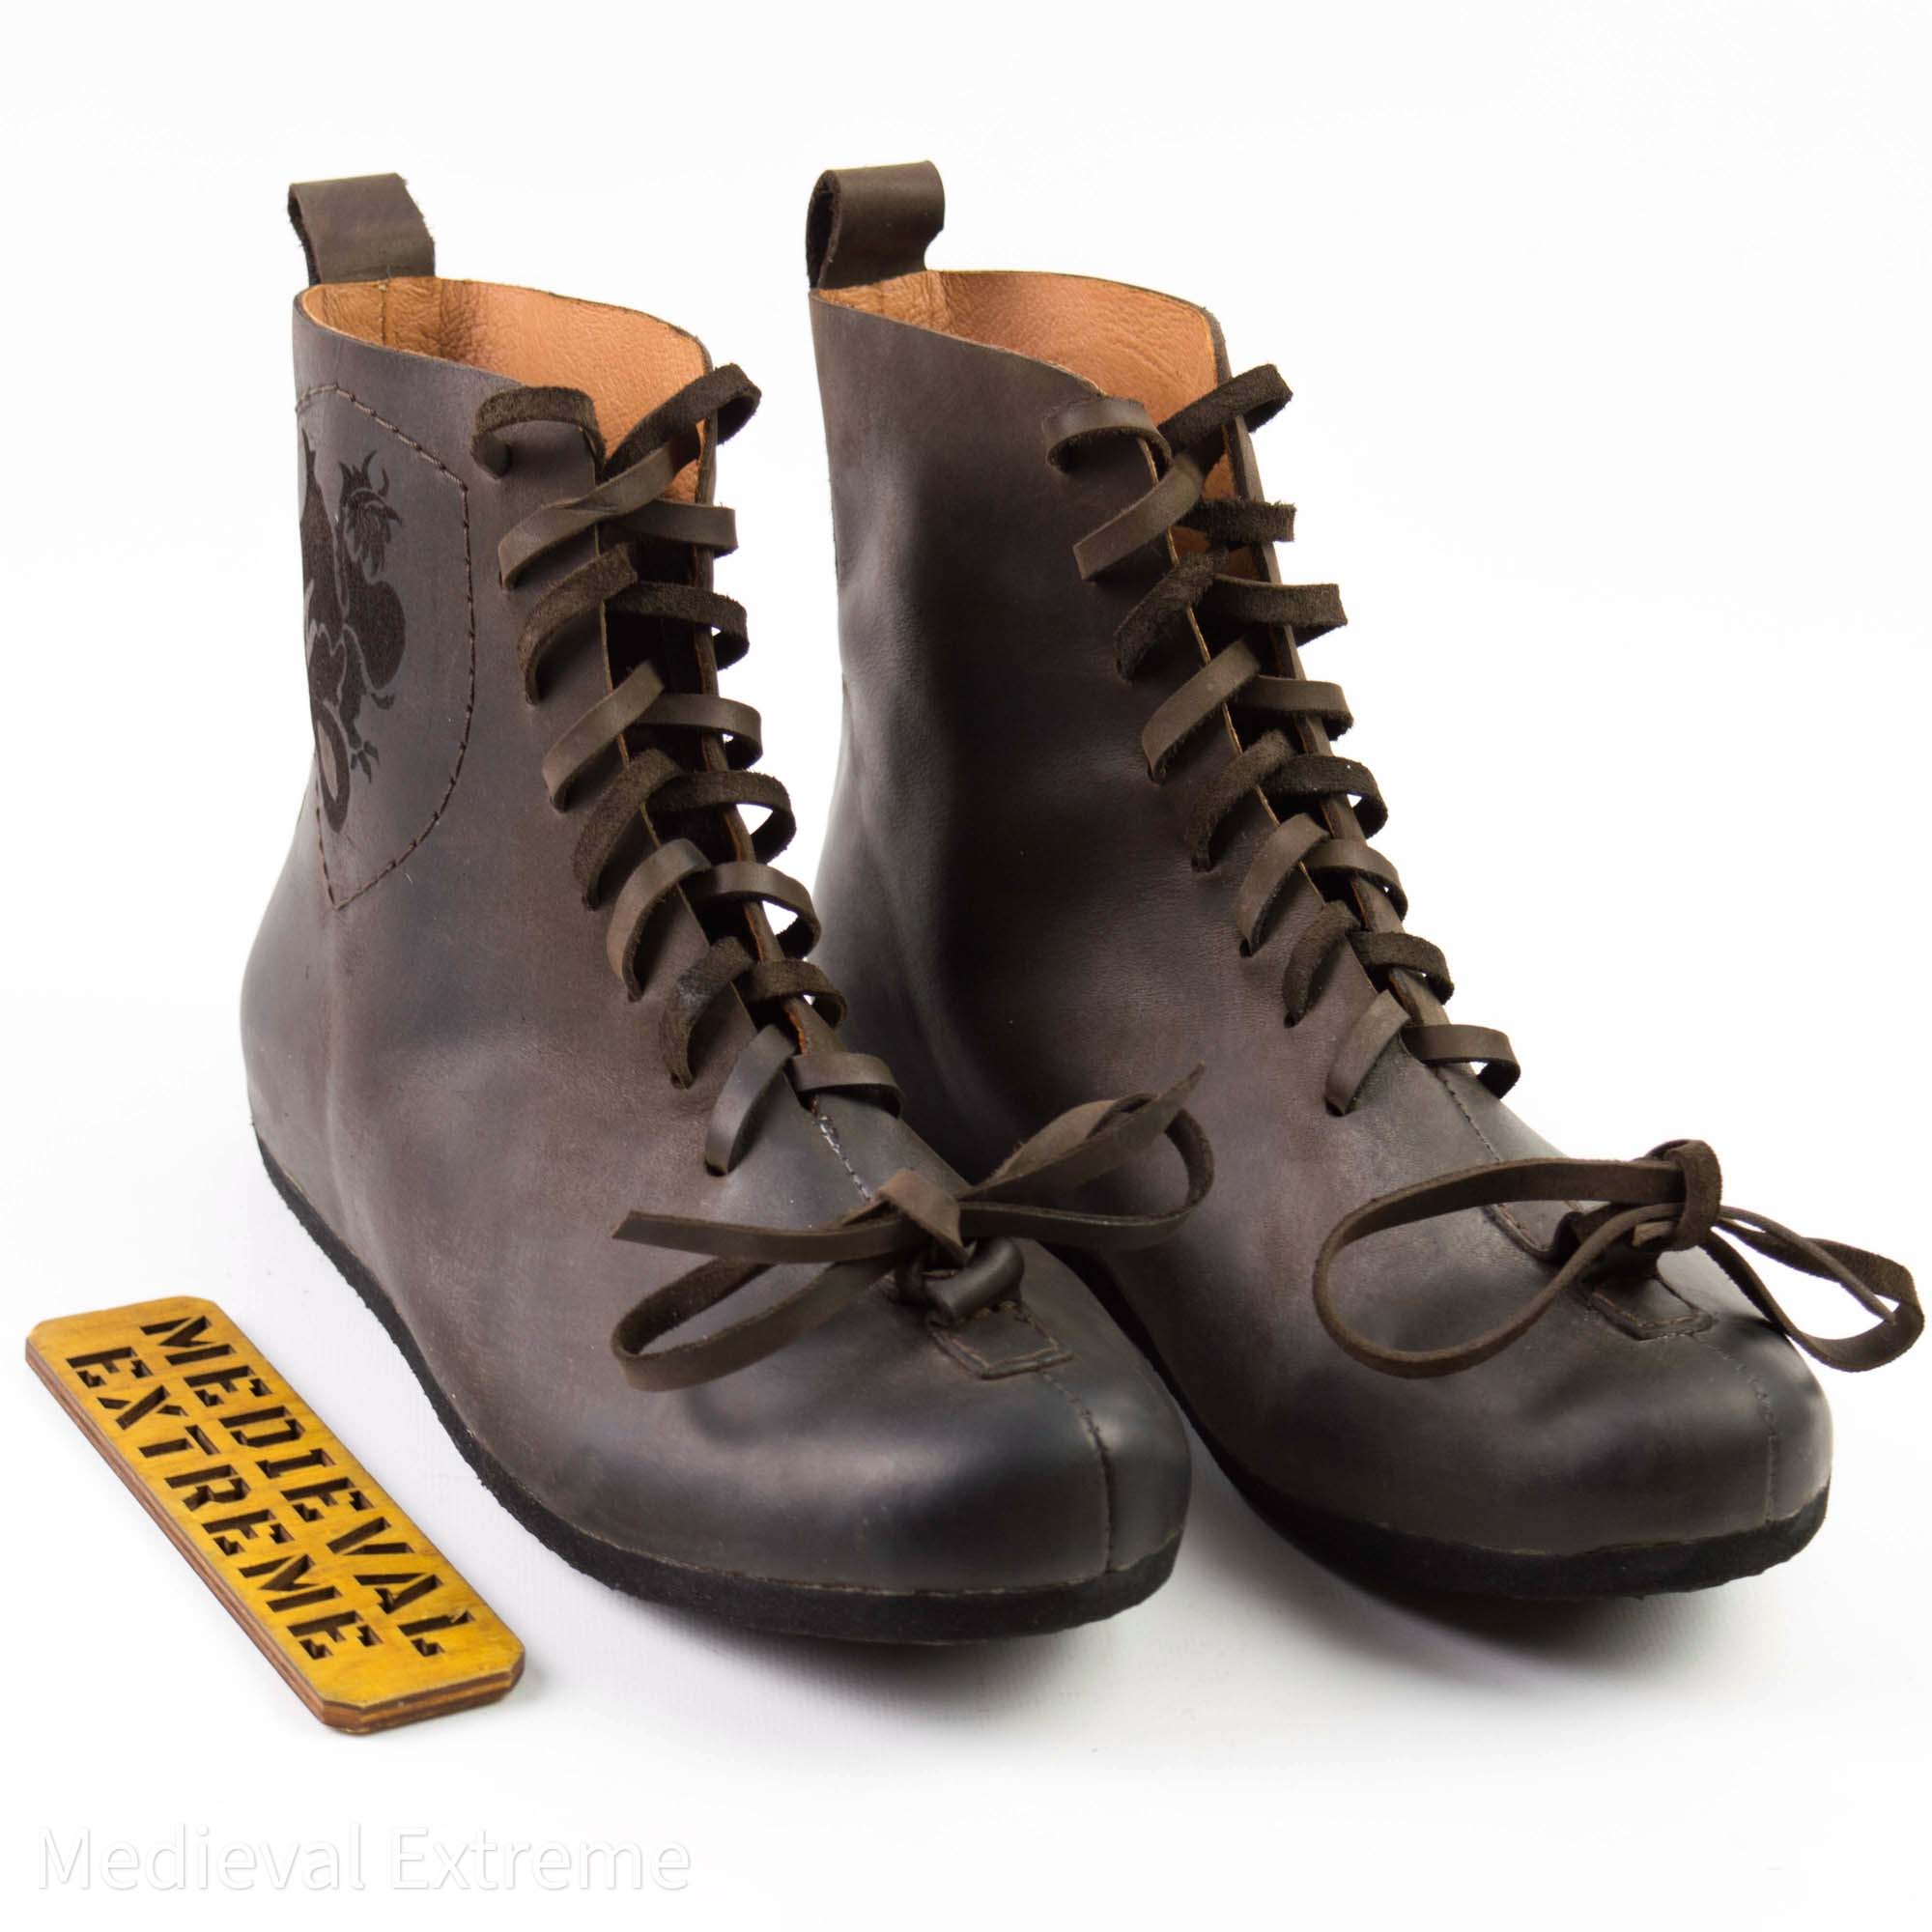 Battle boots with logo